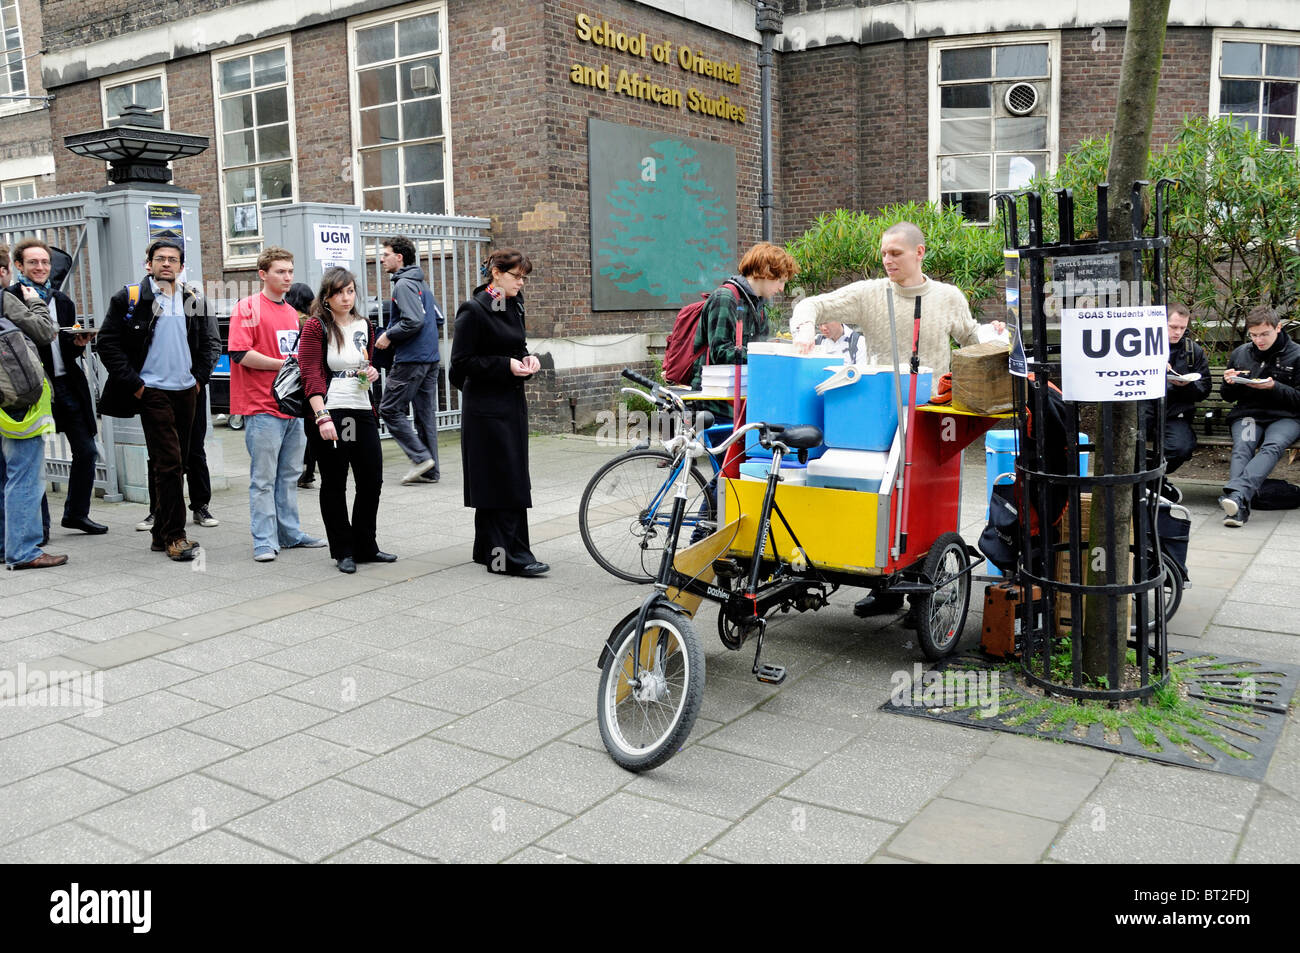 Man from the Hare Krishna Movement serving free food from a bicycle trailer to students and passers by, London England UK Stock Photo